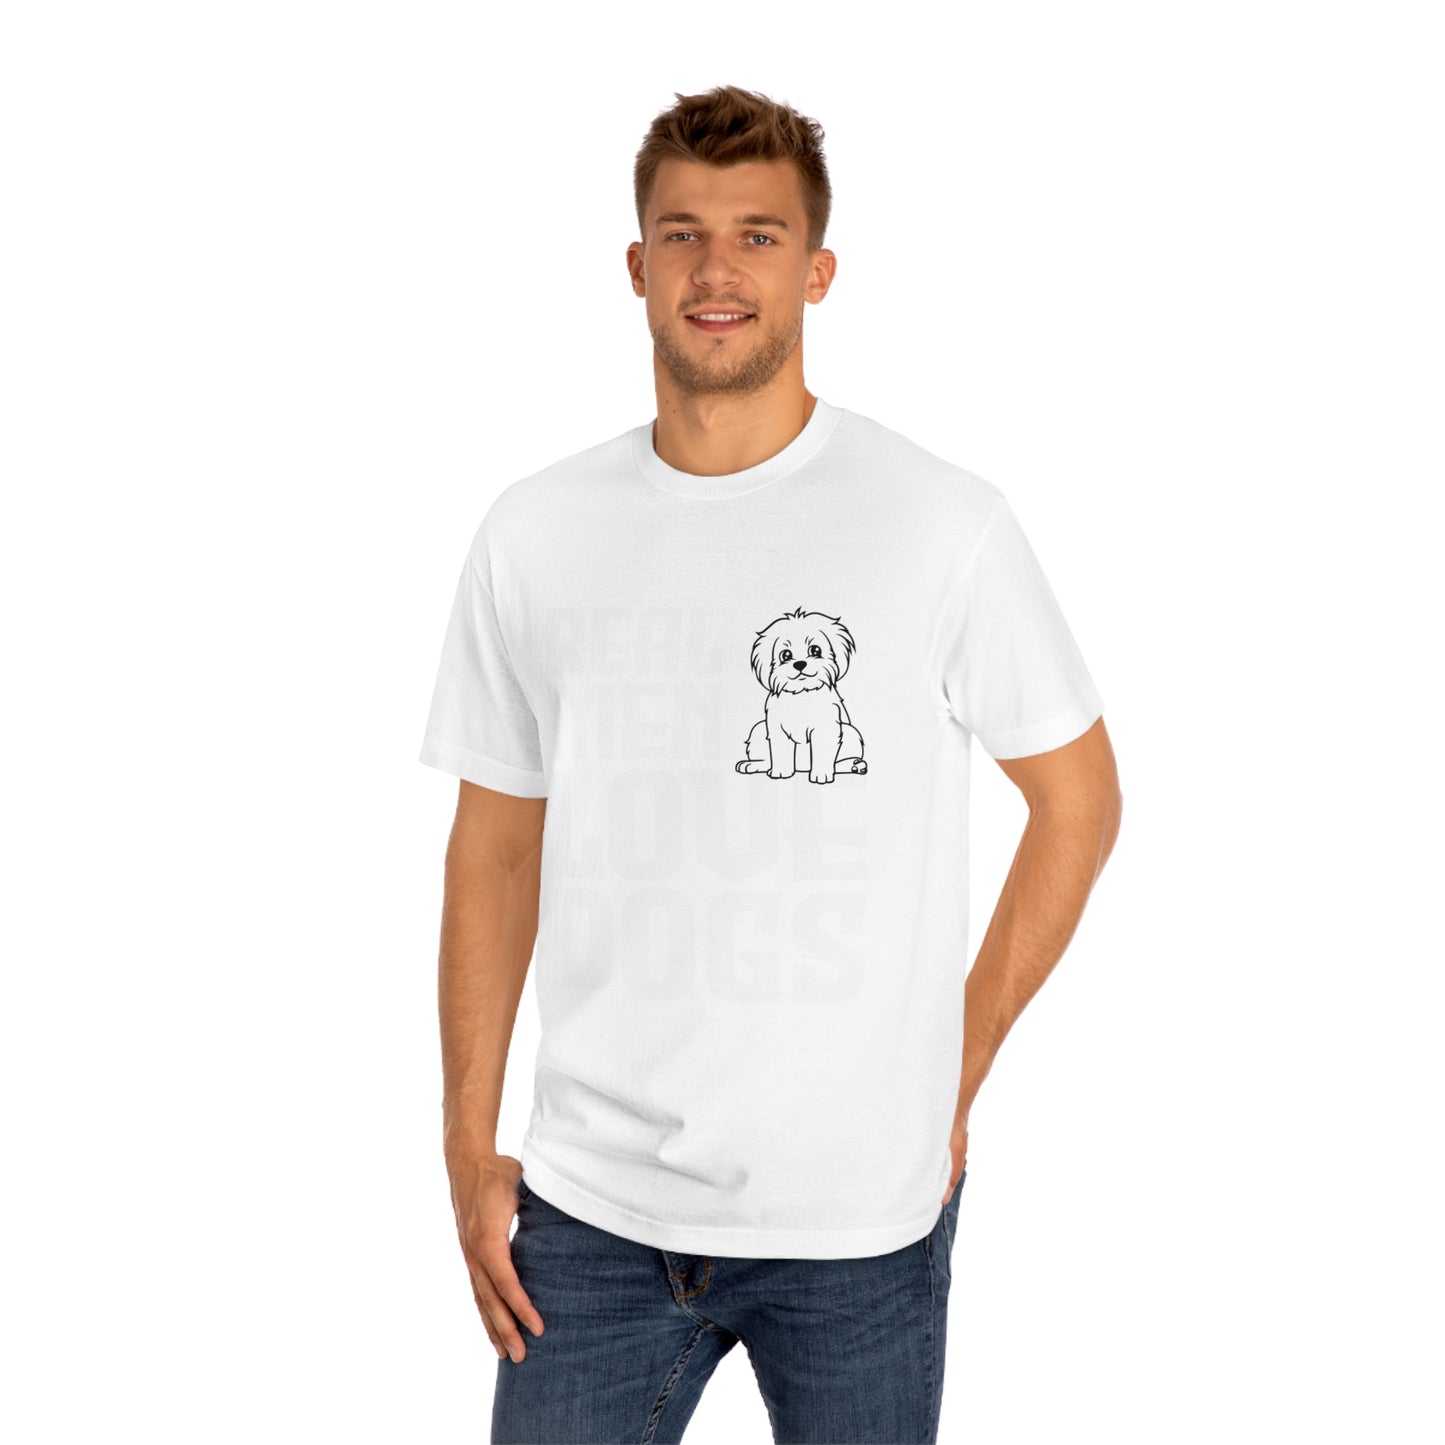 Real man love dogs Unisex Classic Tee